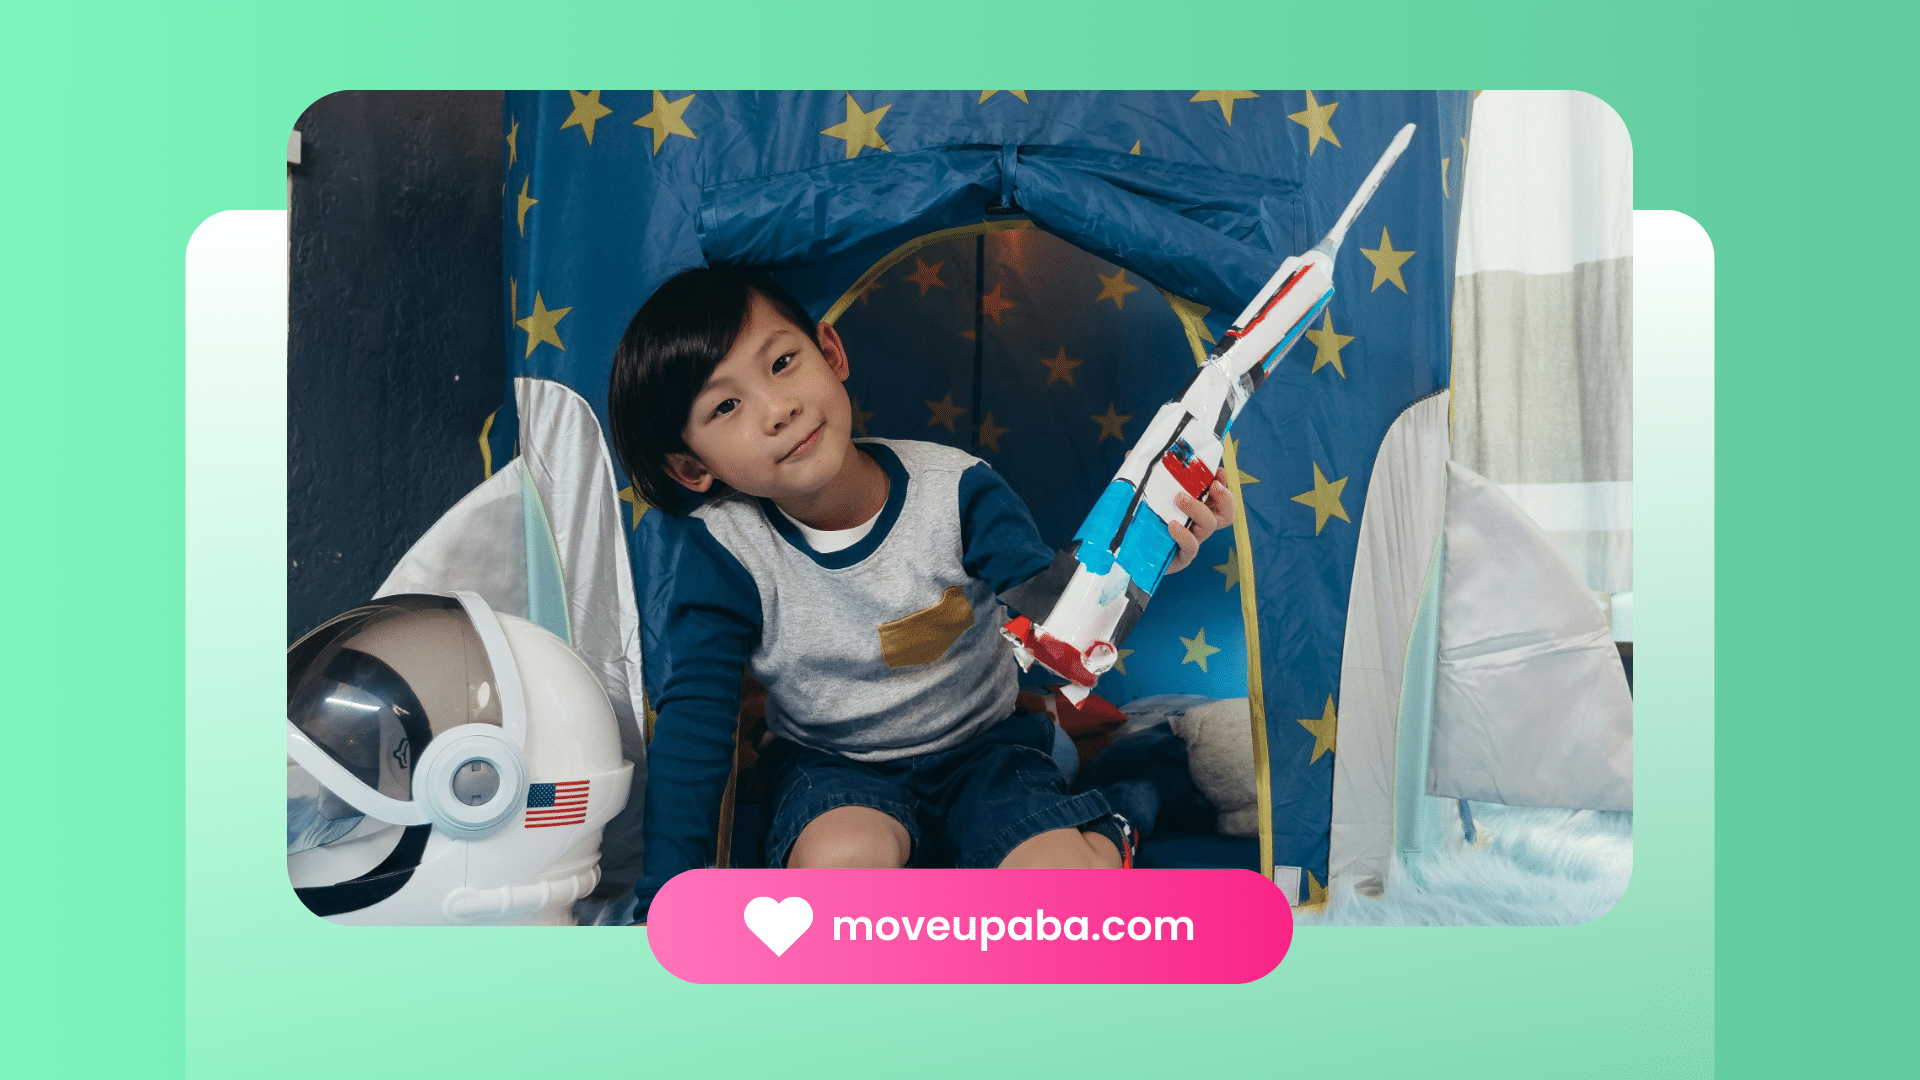 A young boy sitting in a play tent decorated with stars, holding a toy rocket and next to an astronaut helmet, during an ABA therapy session